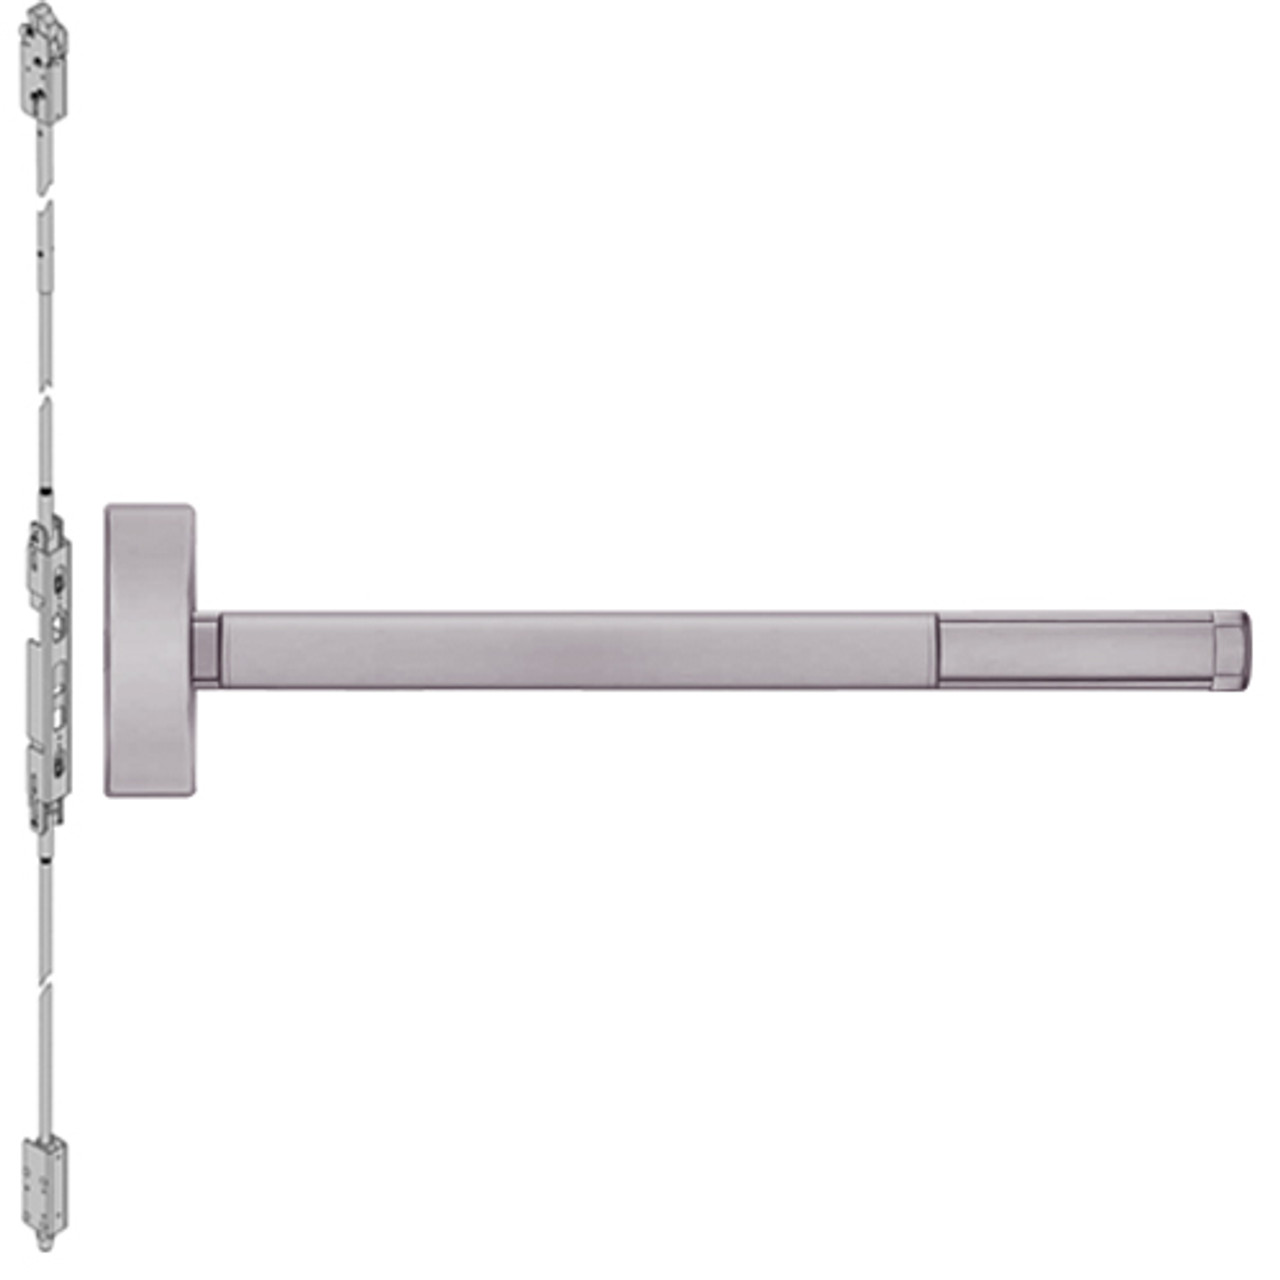 2802CD-630-36 PHI 2800 Series Non Fire Rated Concealed Vertical Rod Exit Device Prepped for Dummy Trim in Satin Stainless Steel Finish